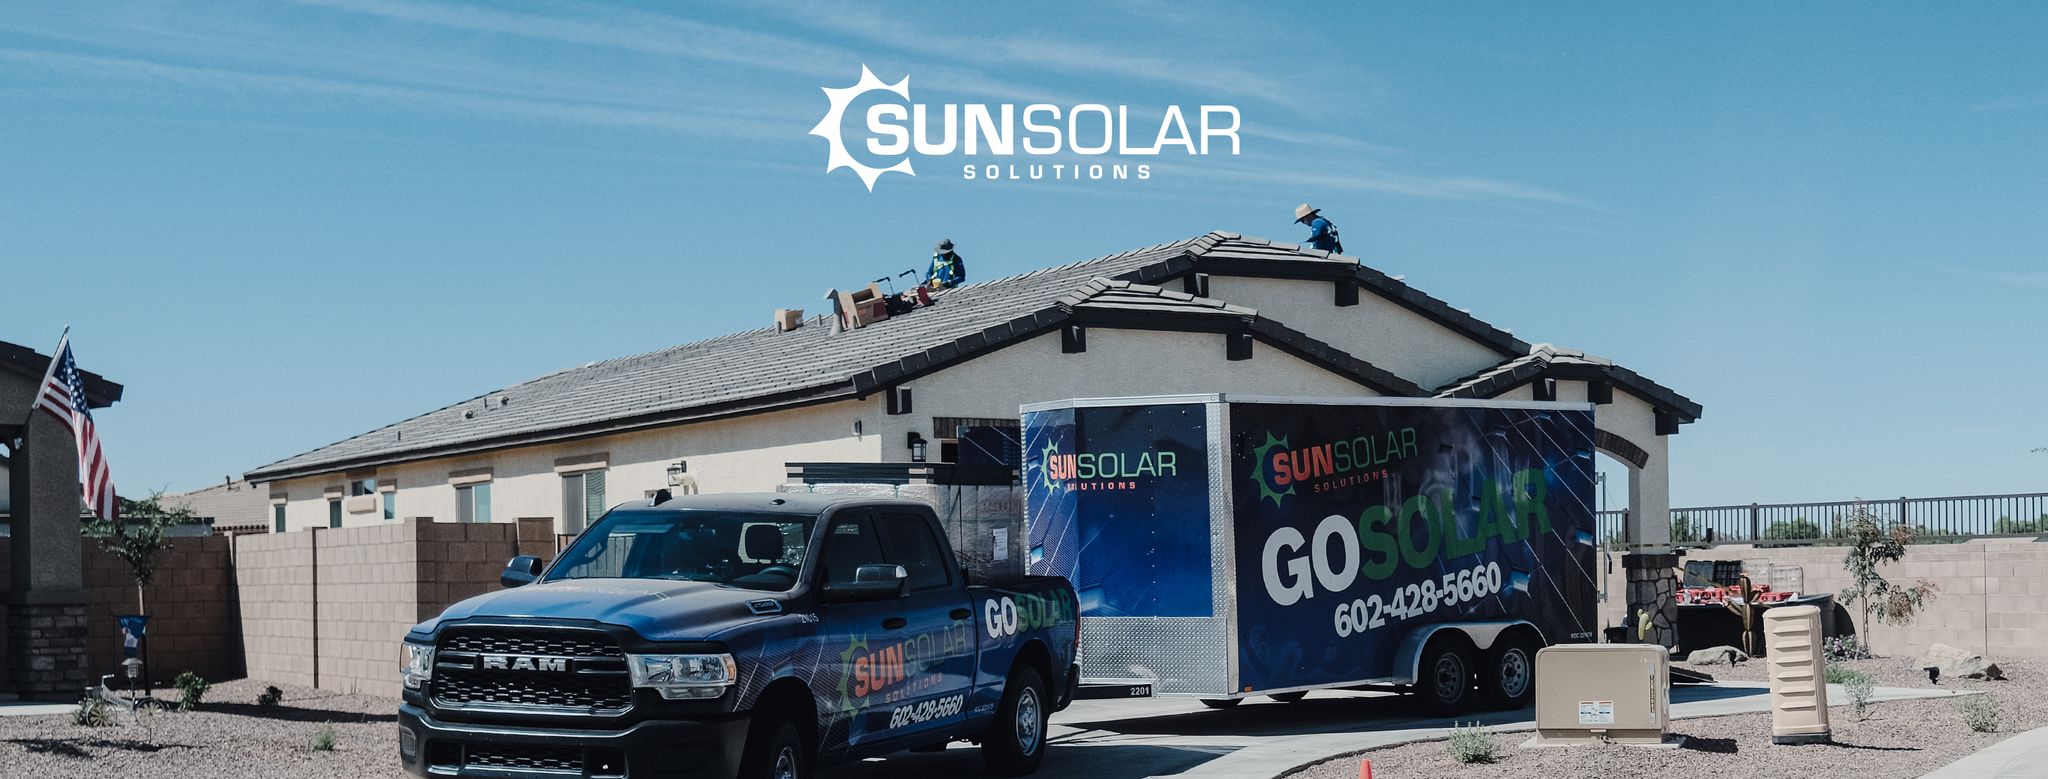 SunSolar Solutions featured image